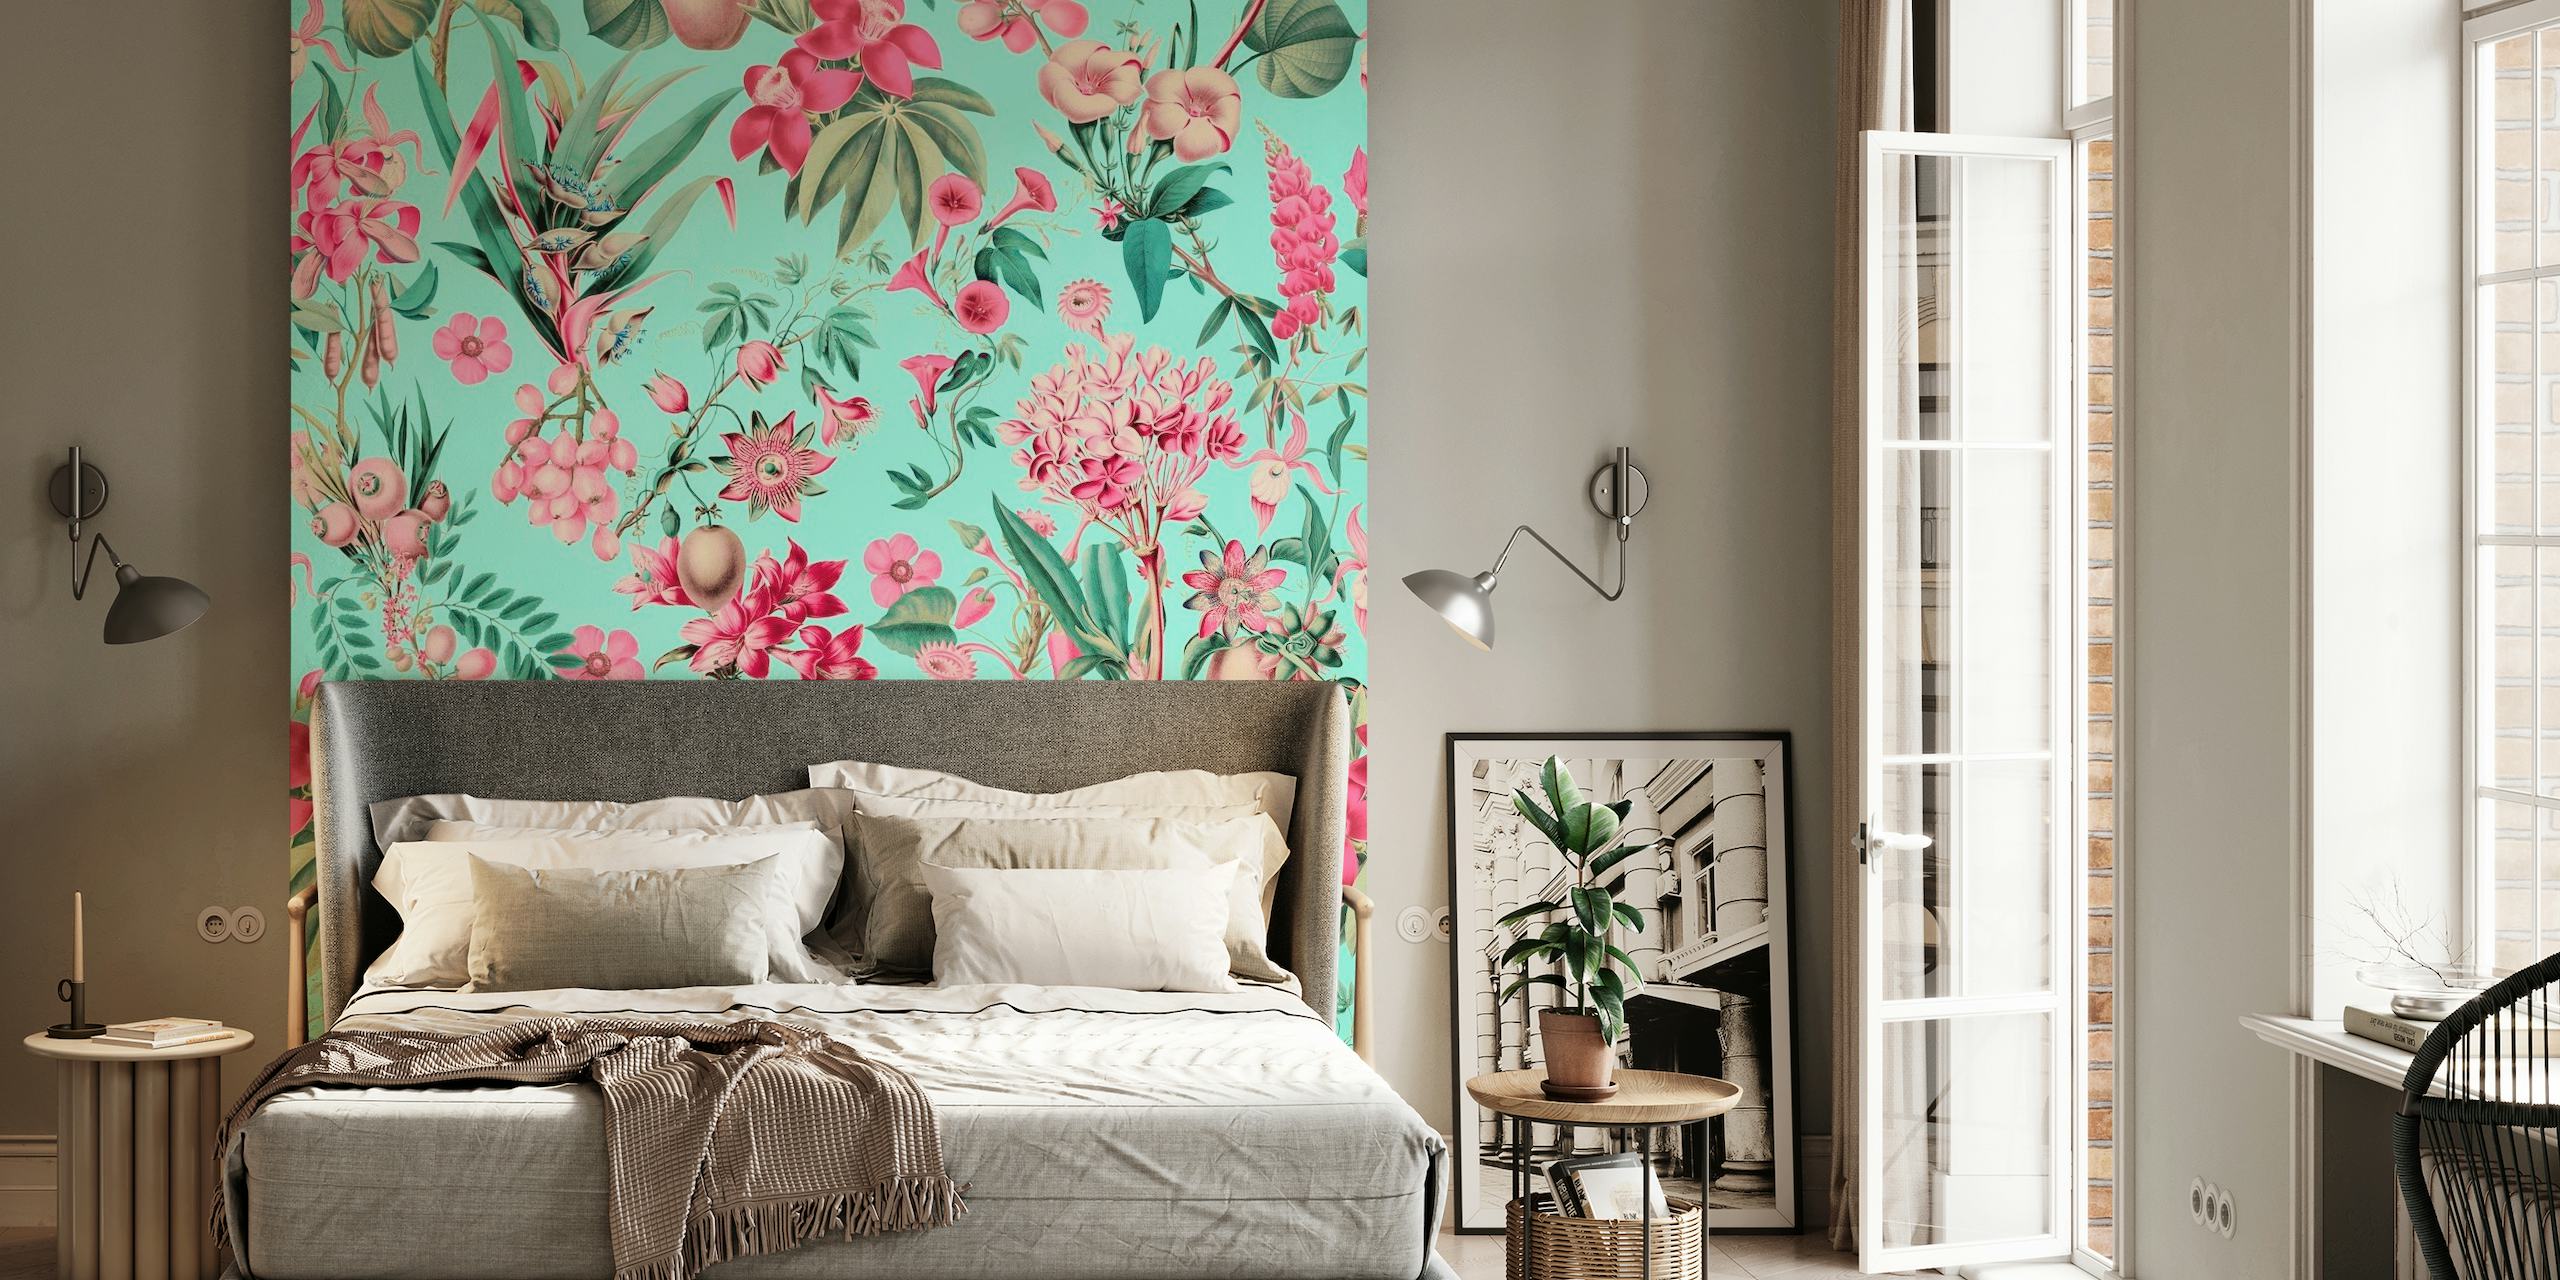 Tropical Jungle Flower And Fruit Garden Pattern In Pink And Teal ταπετσαρία